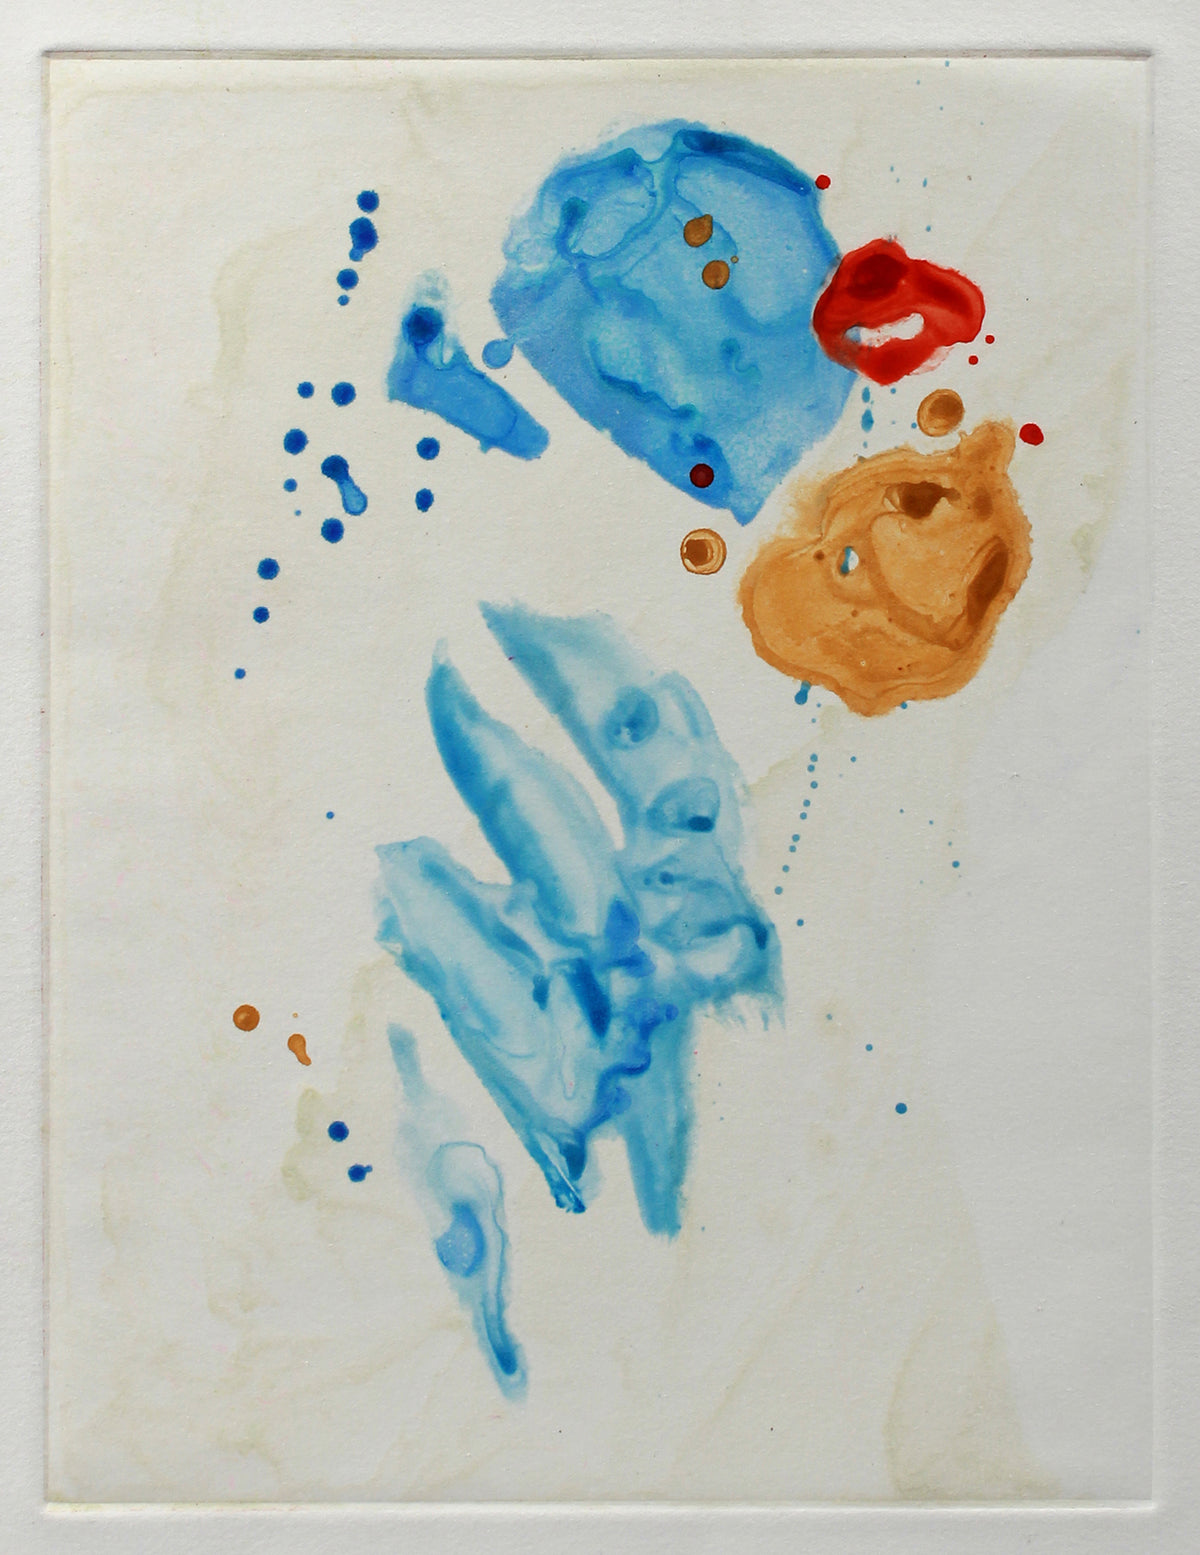 &lt;i&gt;Blue Blots&lt;/i&gt; &lt;br&gt;1990-2000s Monotype &lt;br&gt;&lt;br&gt;#A9229